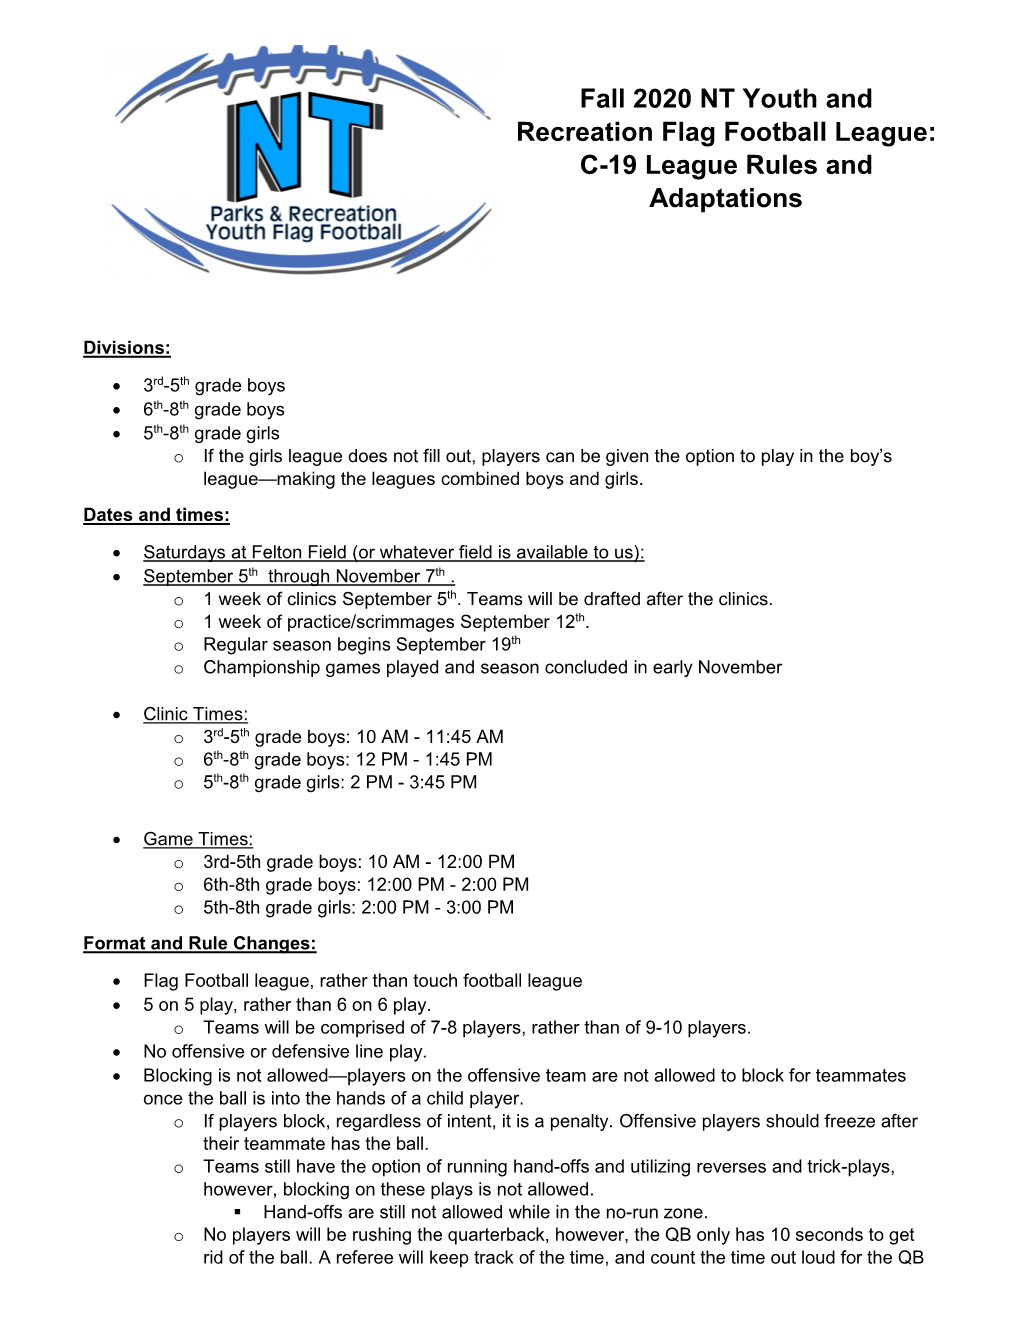 Fall 2020 NT Youth and Recreation Flag Football League: C-19 League Rules and Adaptations